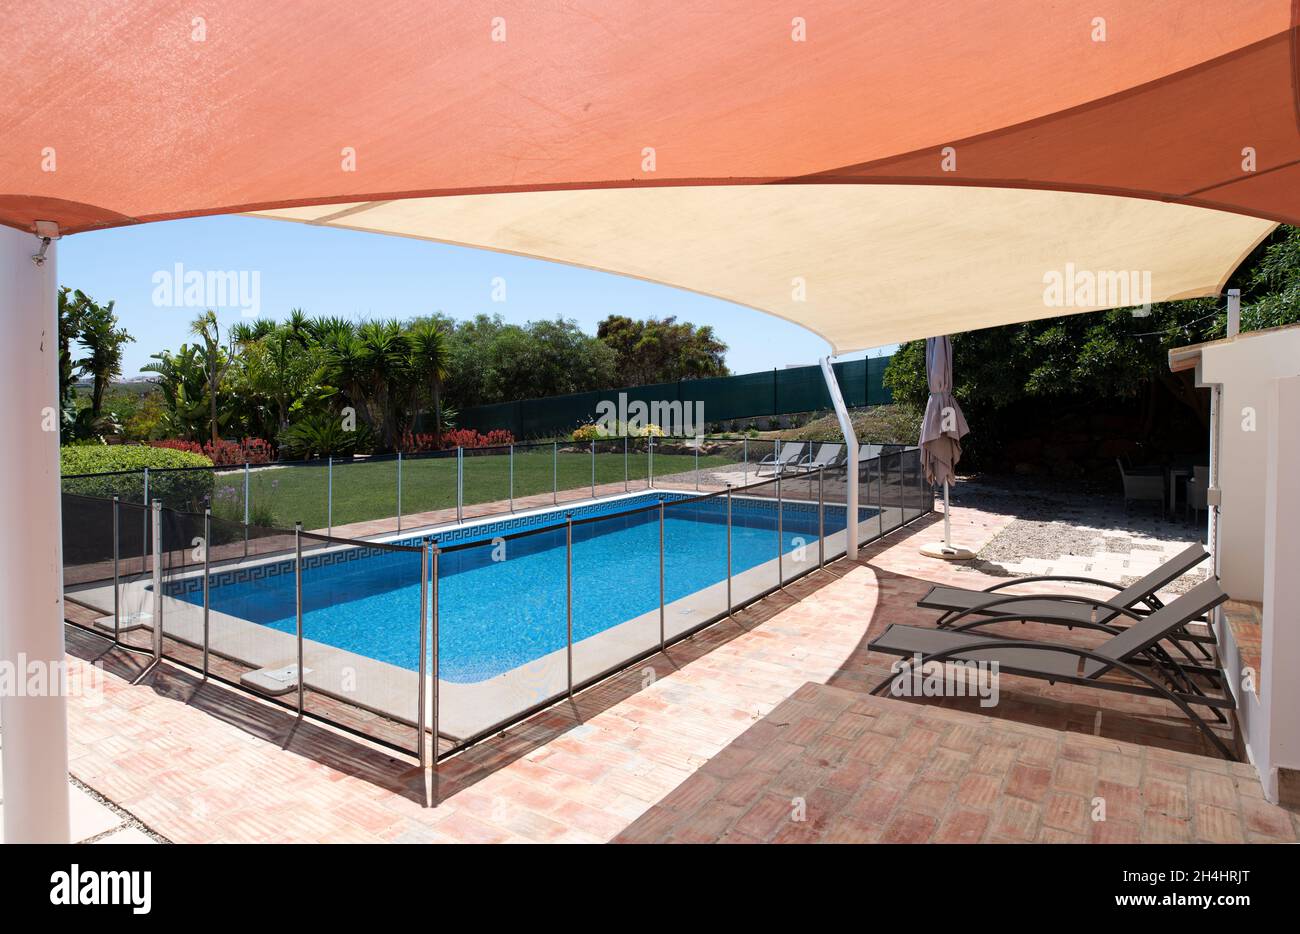 Fenced swimming pool in garden with sunbeds under a shade sail Stock Photo